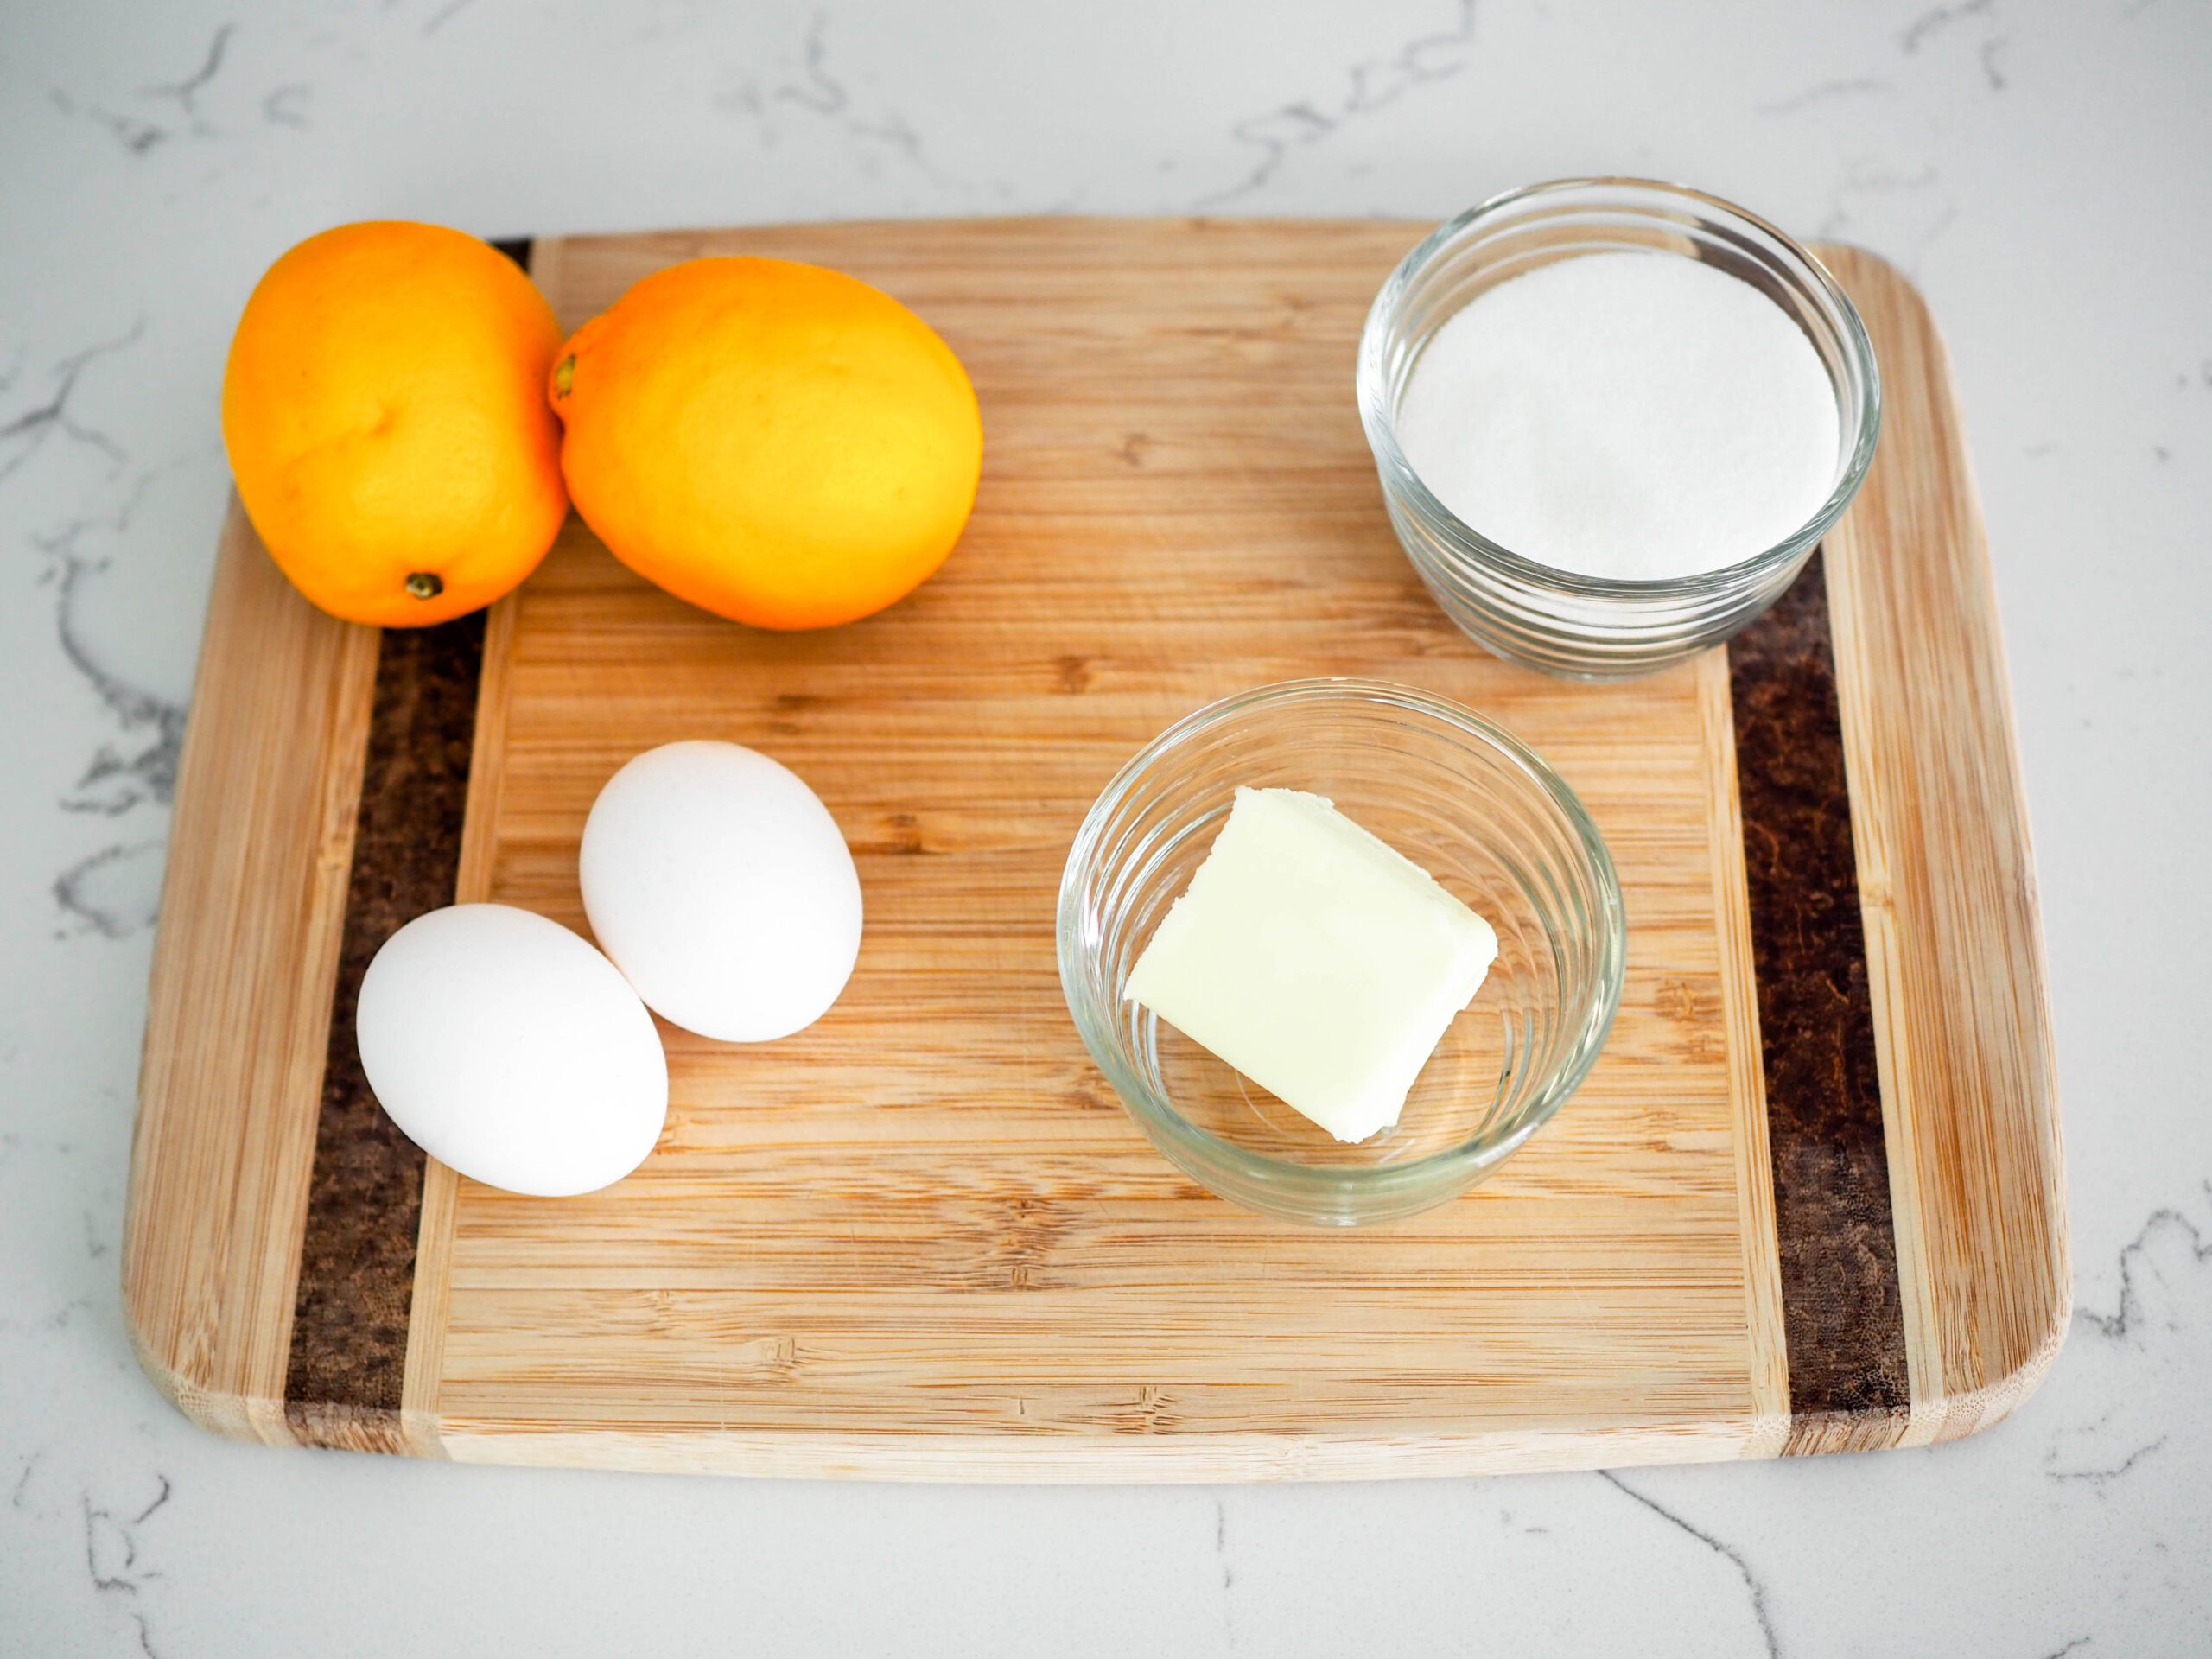 Ingredients for small batch lemon curd arranged on a wooden cutting board.